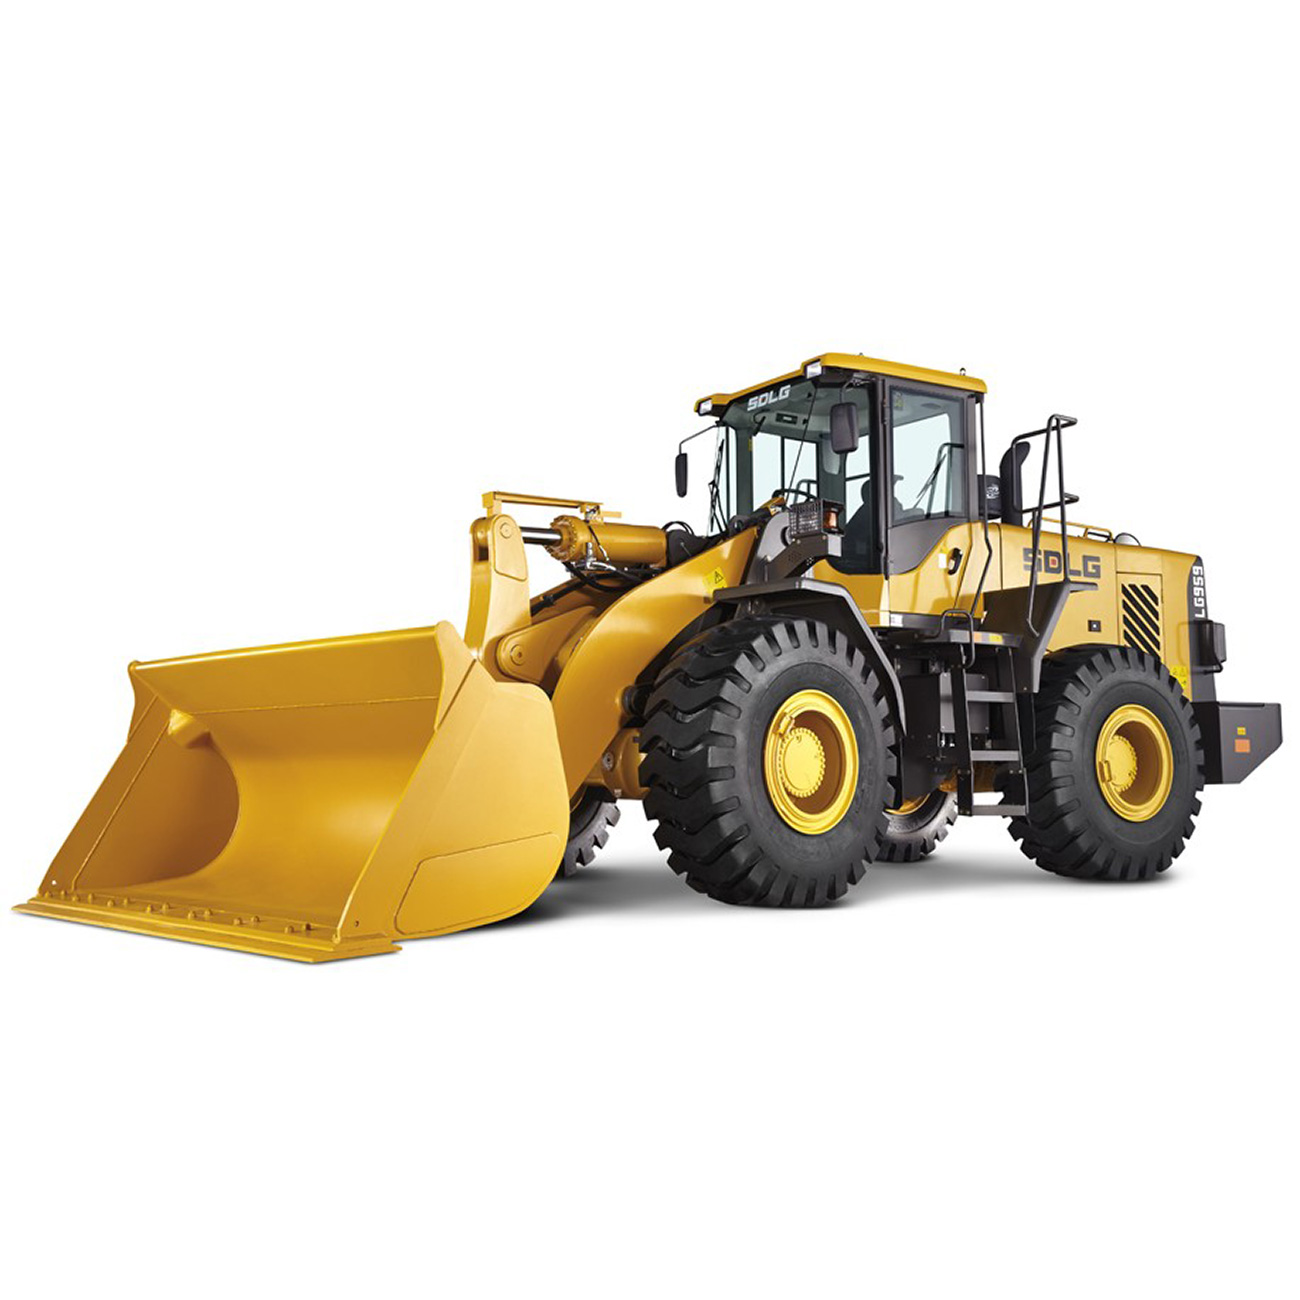 SDLG introduces the new LG959 wheel loader to North America